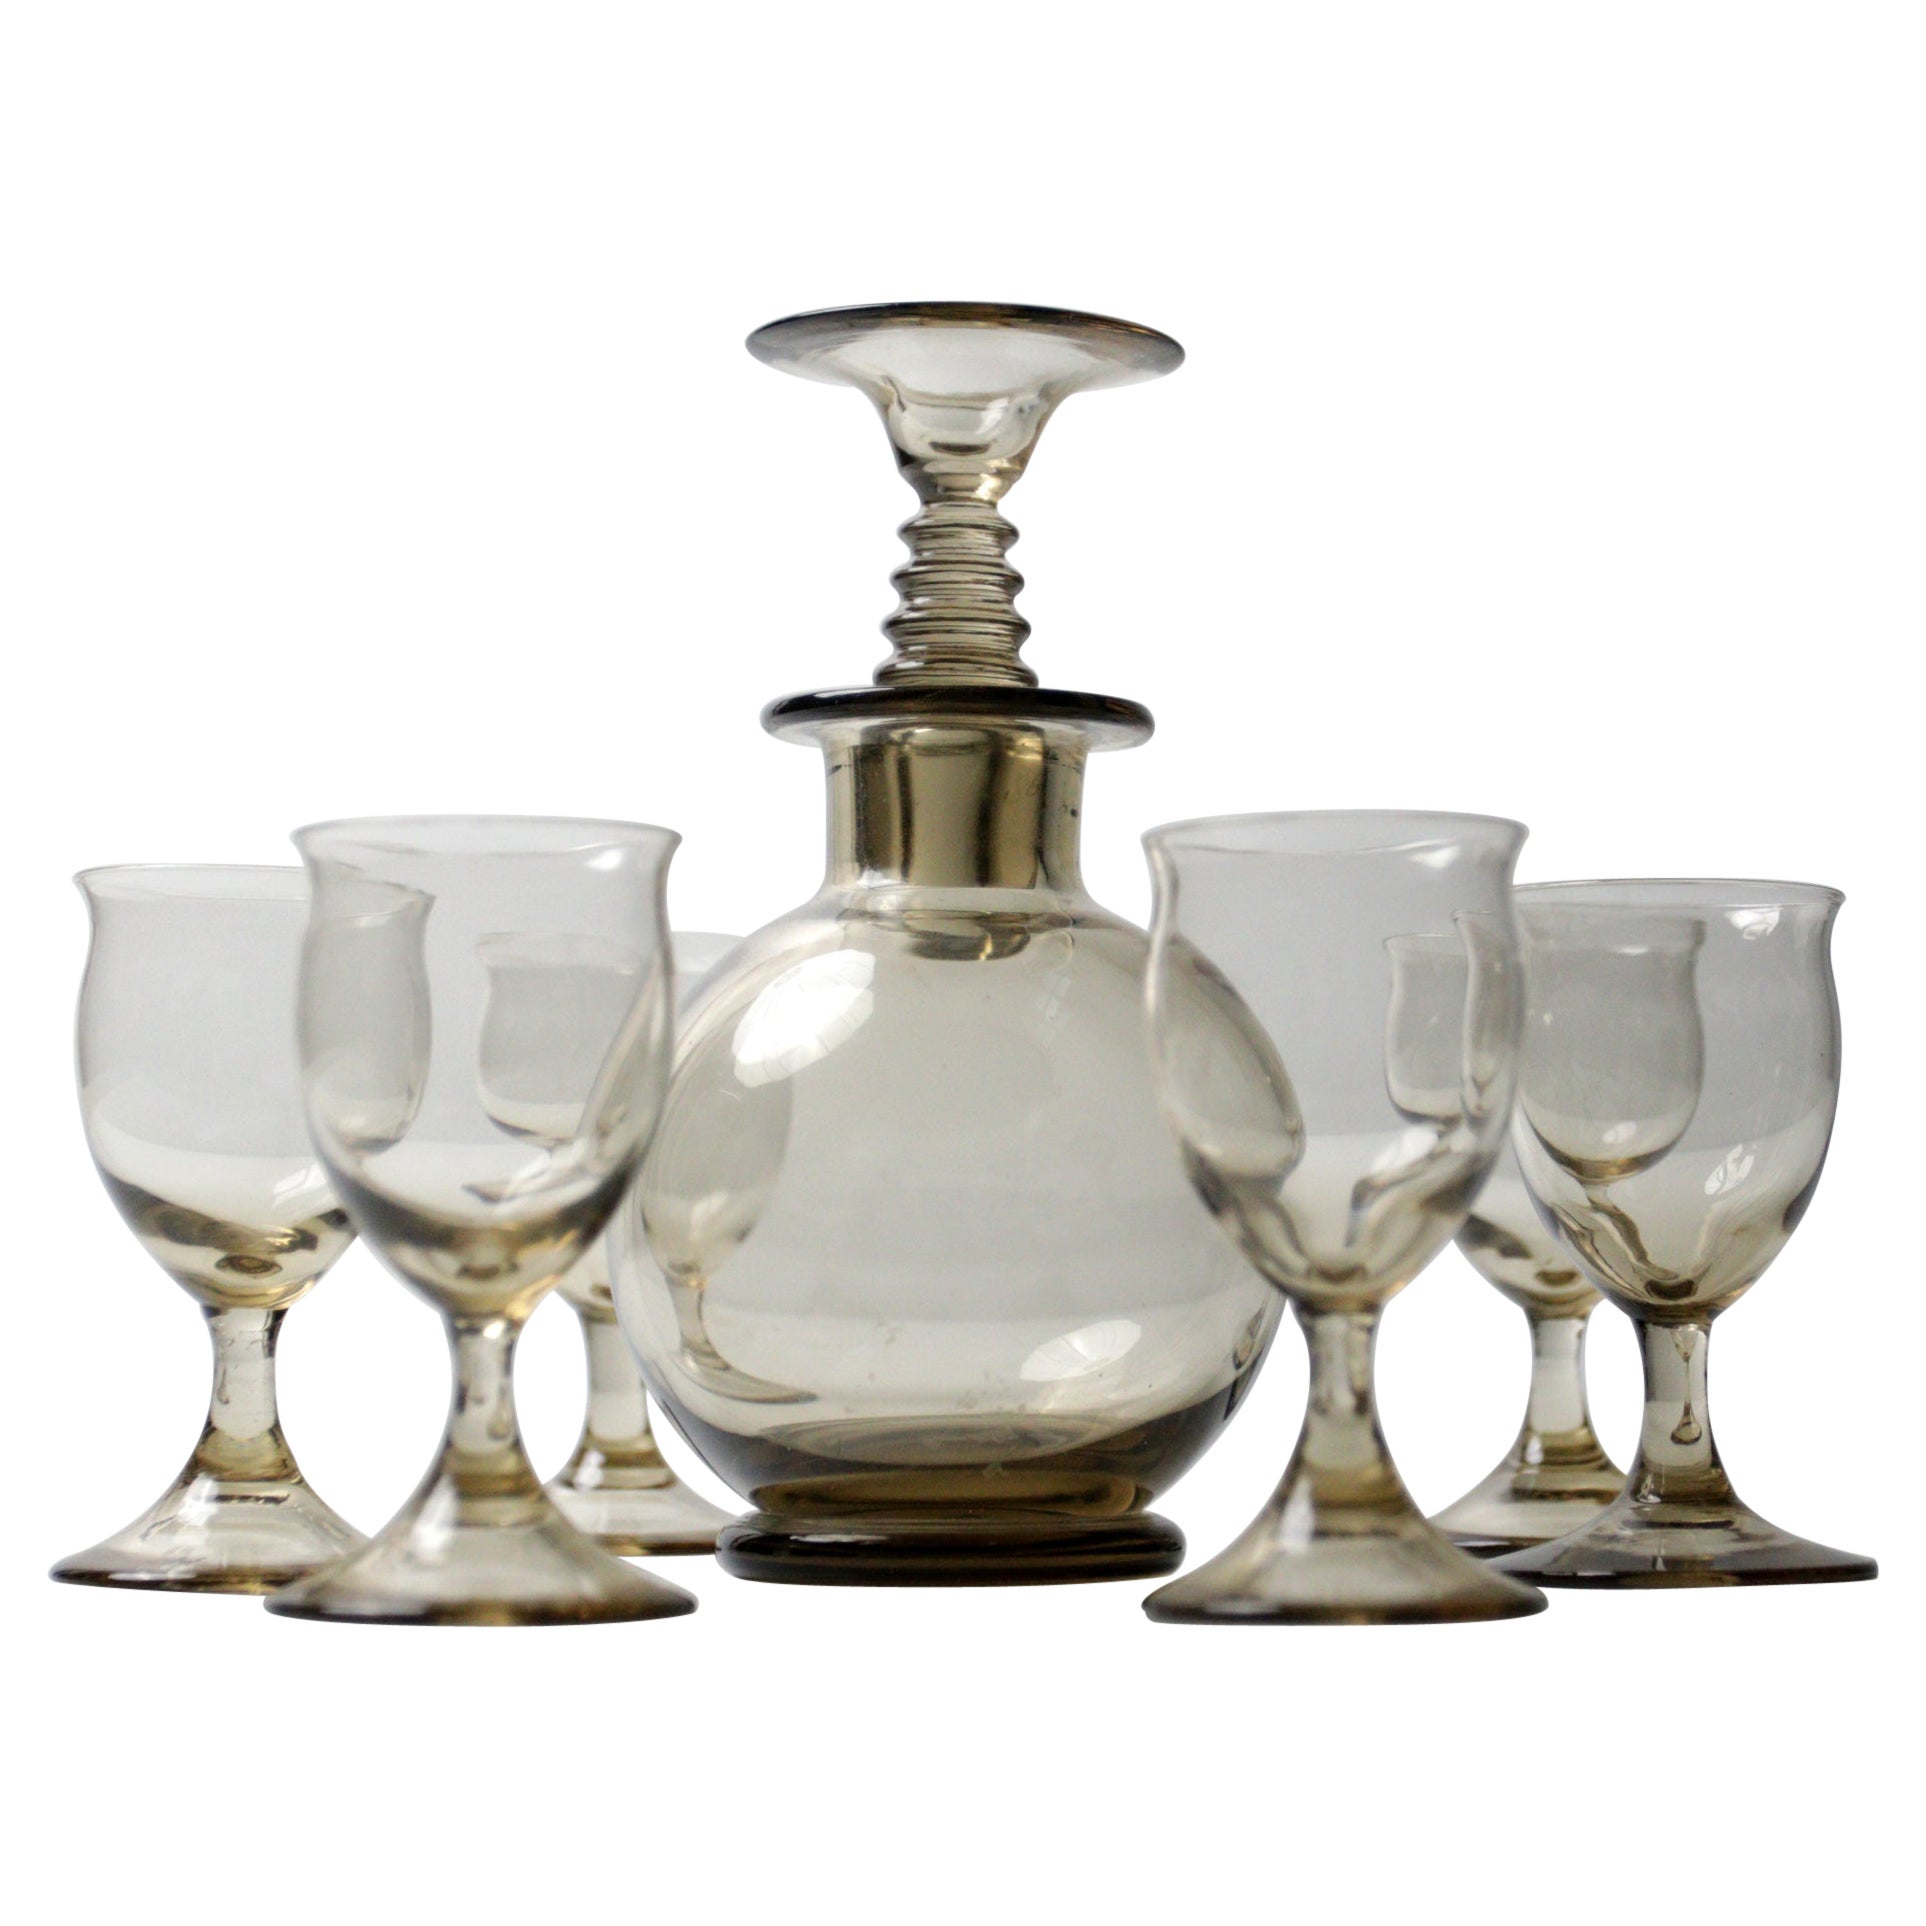 Set of 7 Art Deco "Traditie" W.J. Rozendaal 1932-'33 Decanter and 6 Glasses